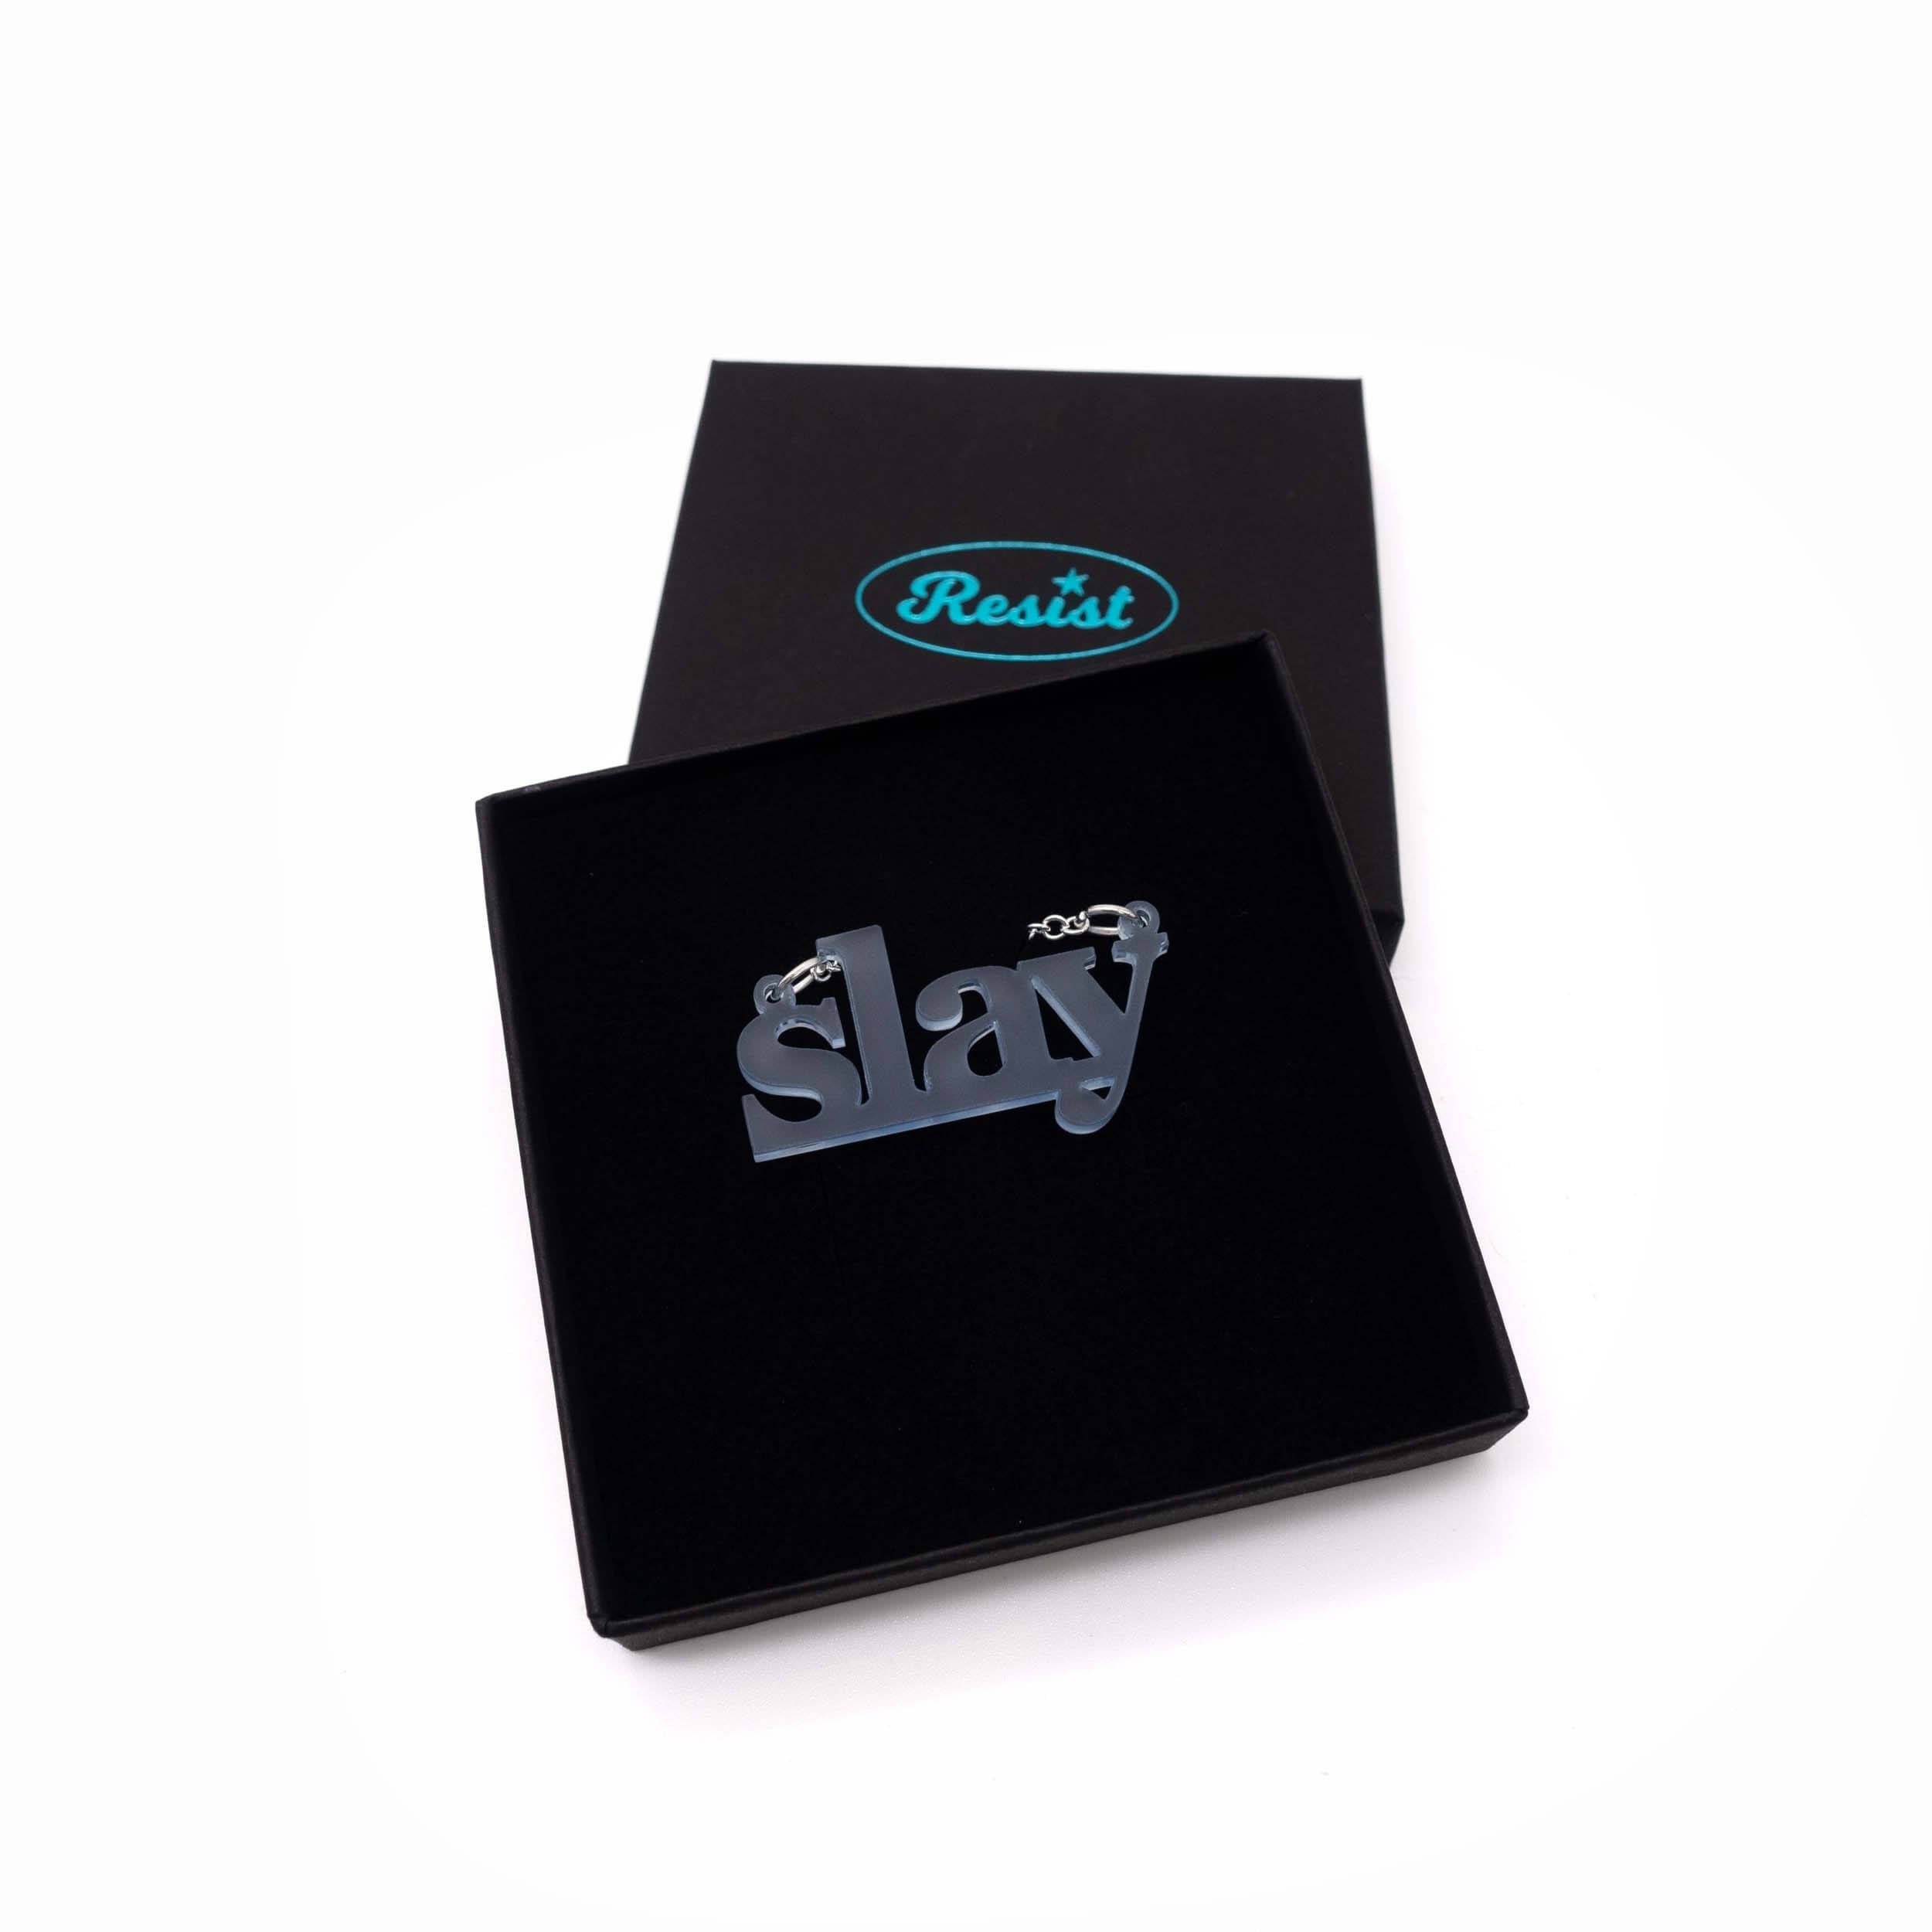 Sky frost Slay necklace shown in a Wear and Resist gift box. 